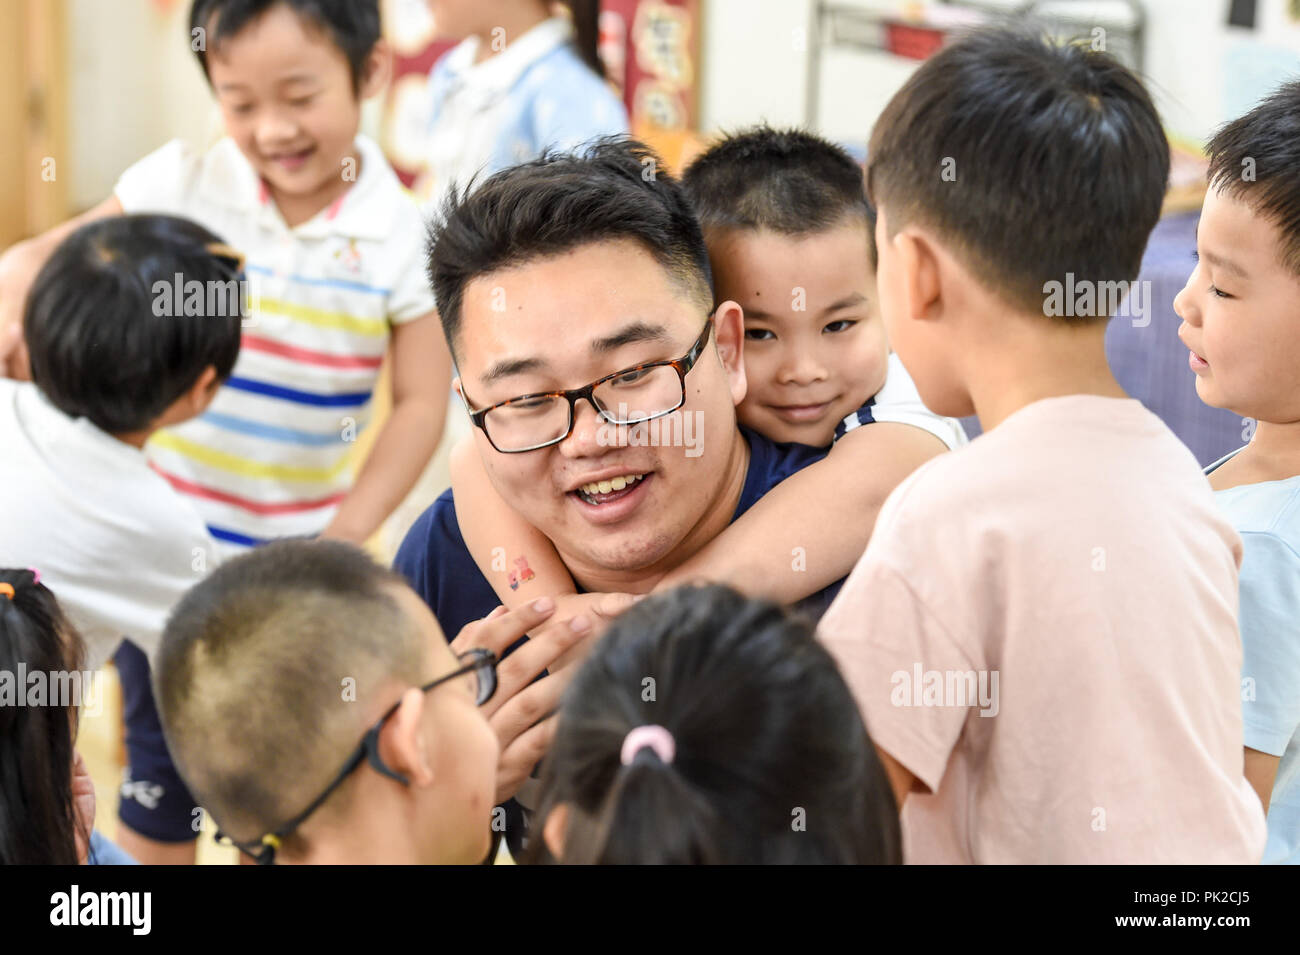 (180910) -- NANJING, Sept. 10, 2018 (Xinhua) -- Guo Xinwang has fun with children at the Xiaoxihu kindergarten in Nanjing, capital of east China's Jiangsu Province, Sept. 4, 2018. Guo, born in 1993 and graduated from the Jiangsu Normal University, became the first and only male teacher of the Xiaoxihu kindergarten three years ago. There are 400 plus male teachers in Nanjing nowadays, up to three percent of the whole teachers working in kindergartens. (Xinhua/Li Bo) (zwx) Stock Photo